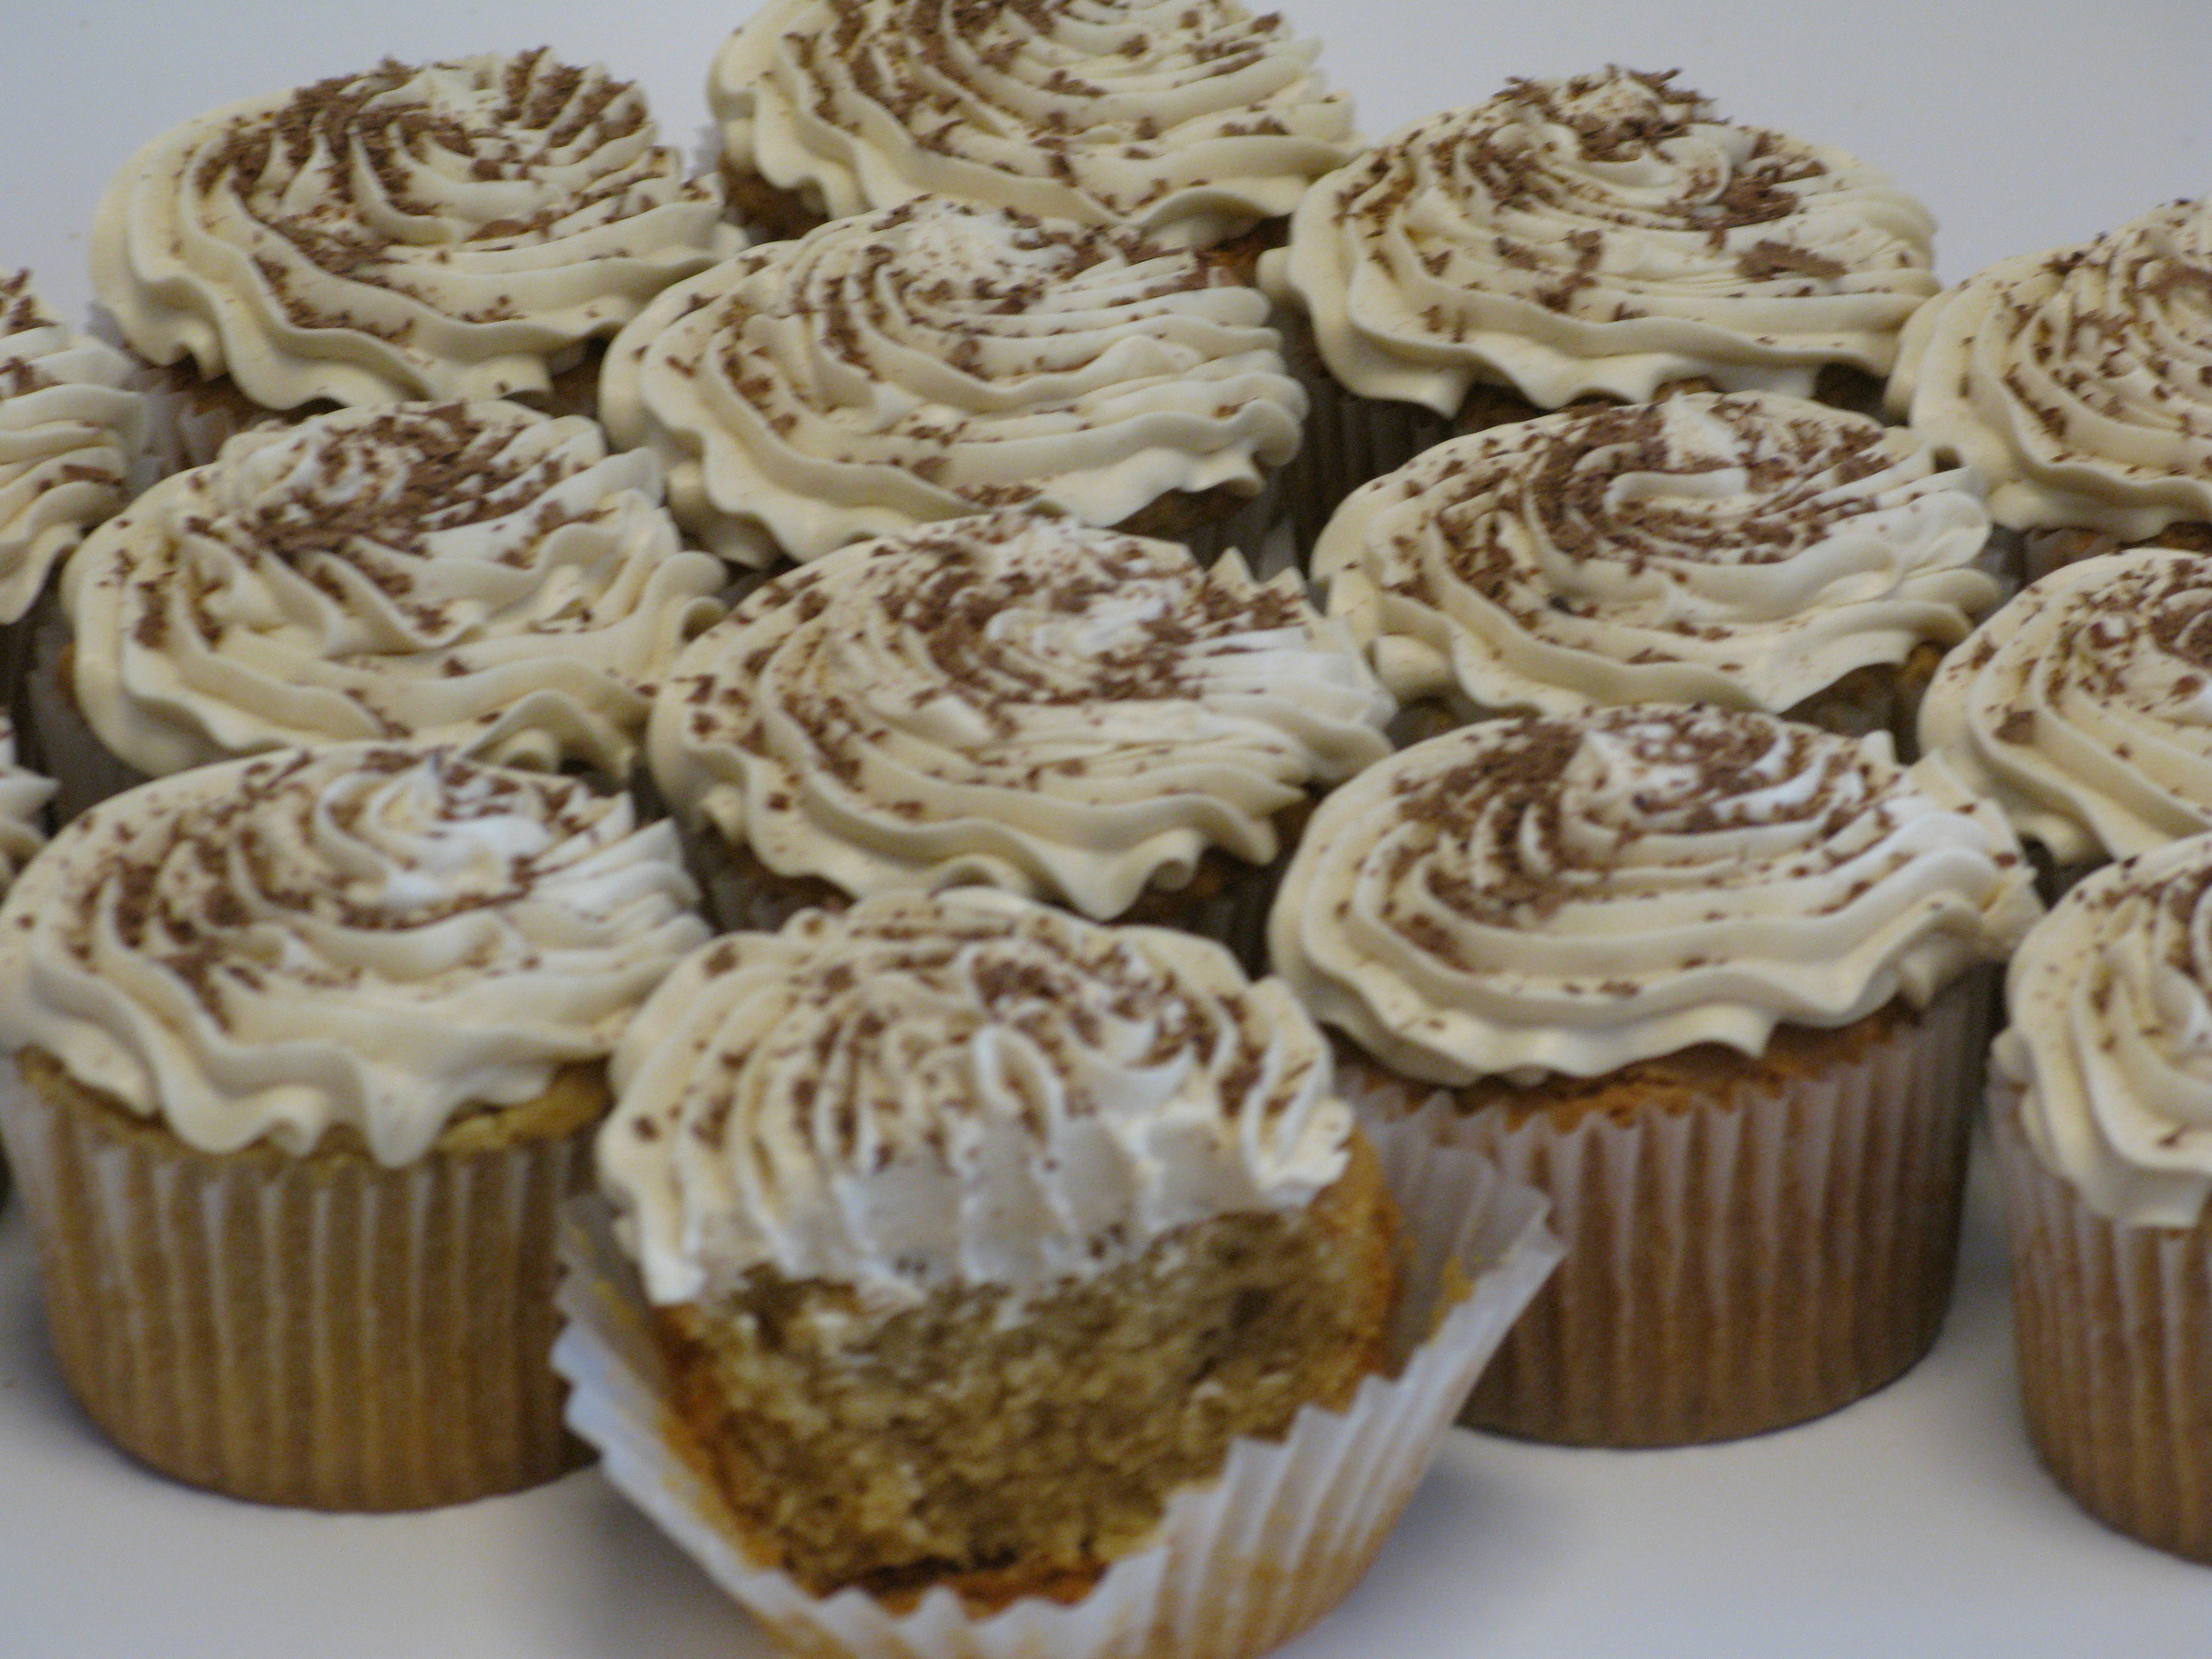 rich, and combining  the  is cupcake using cake deliciously This mix coffee flavors tiramisu  of